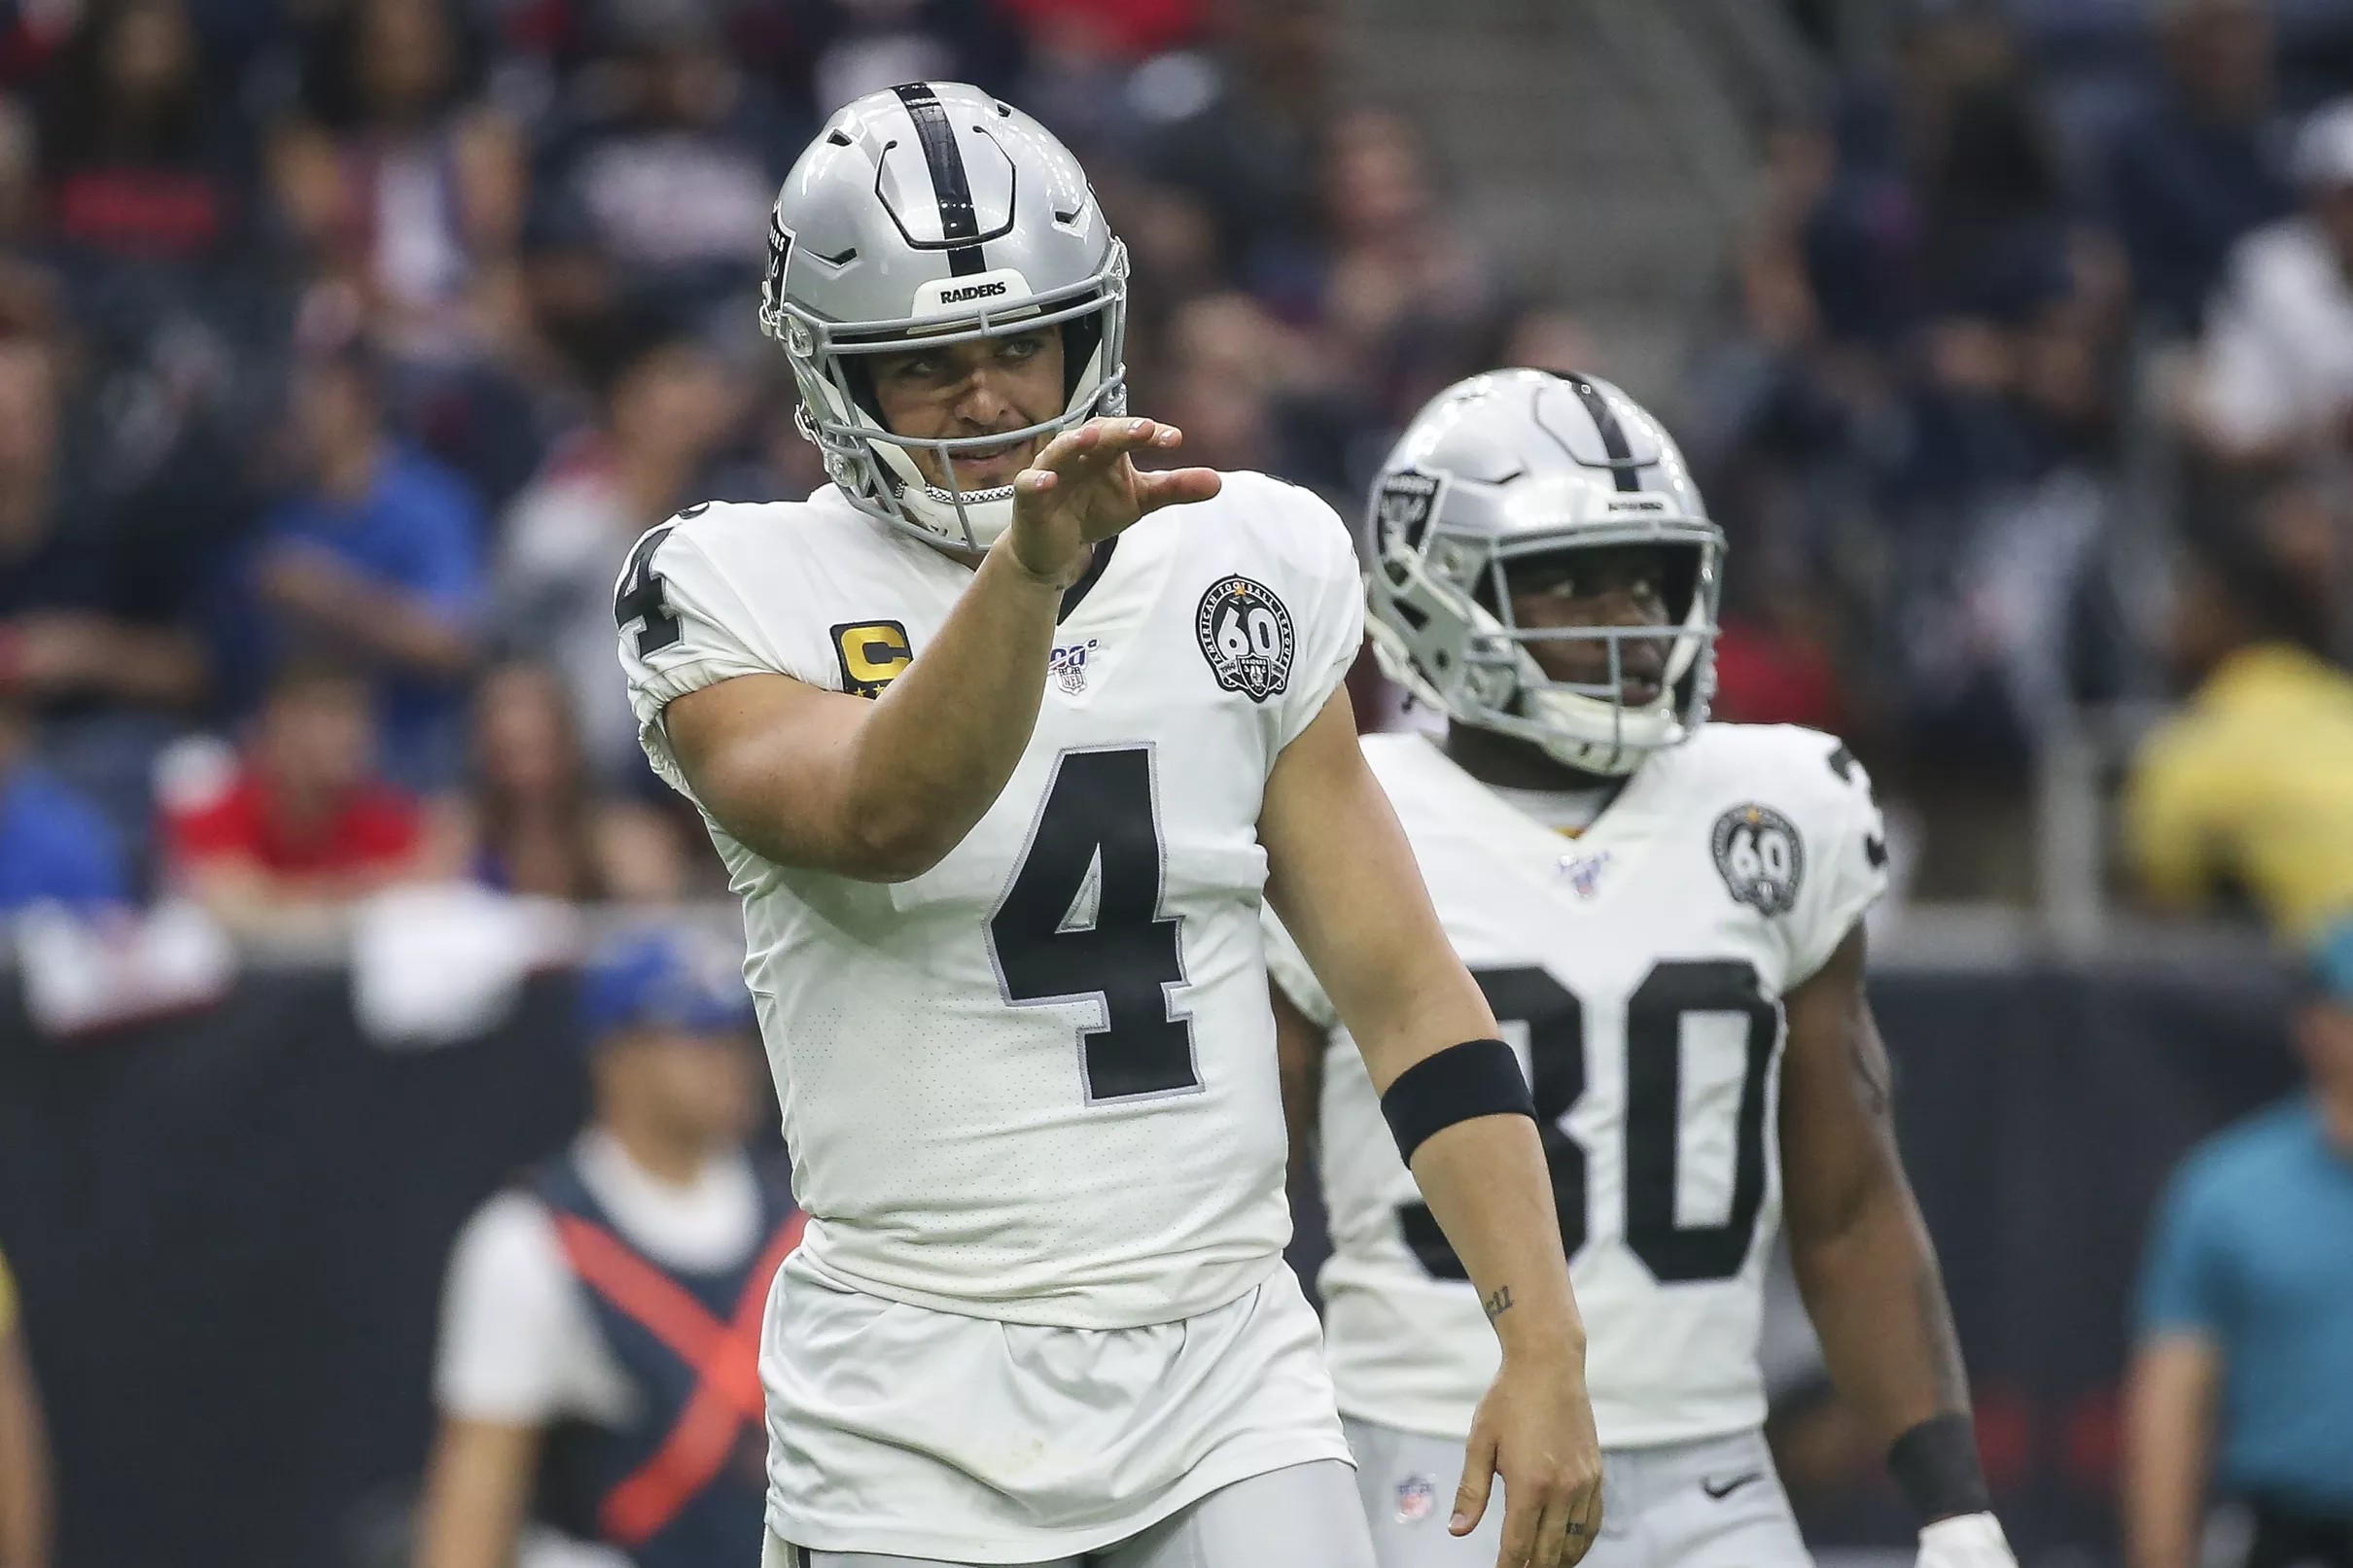 Mapping out the Raiders’ path to the playoffs